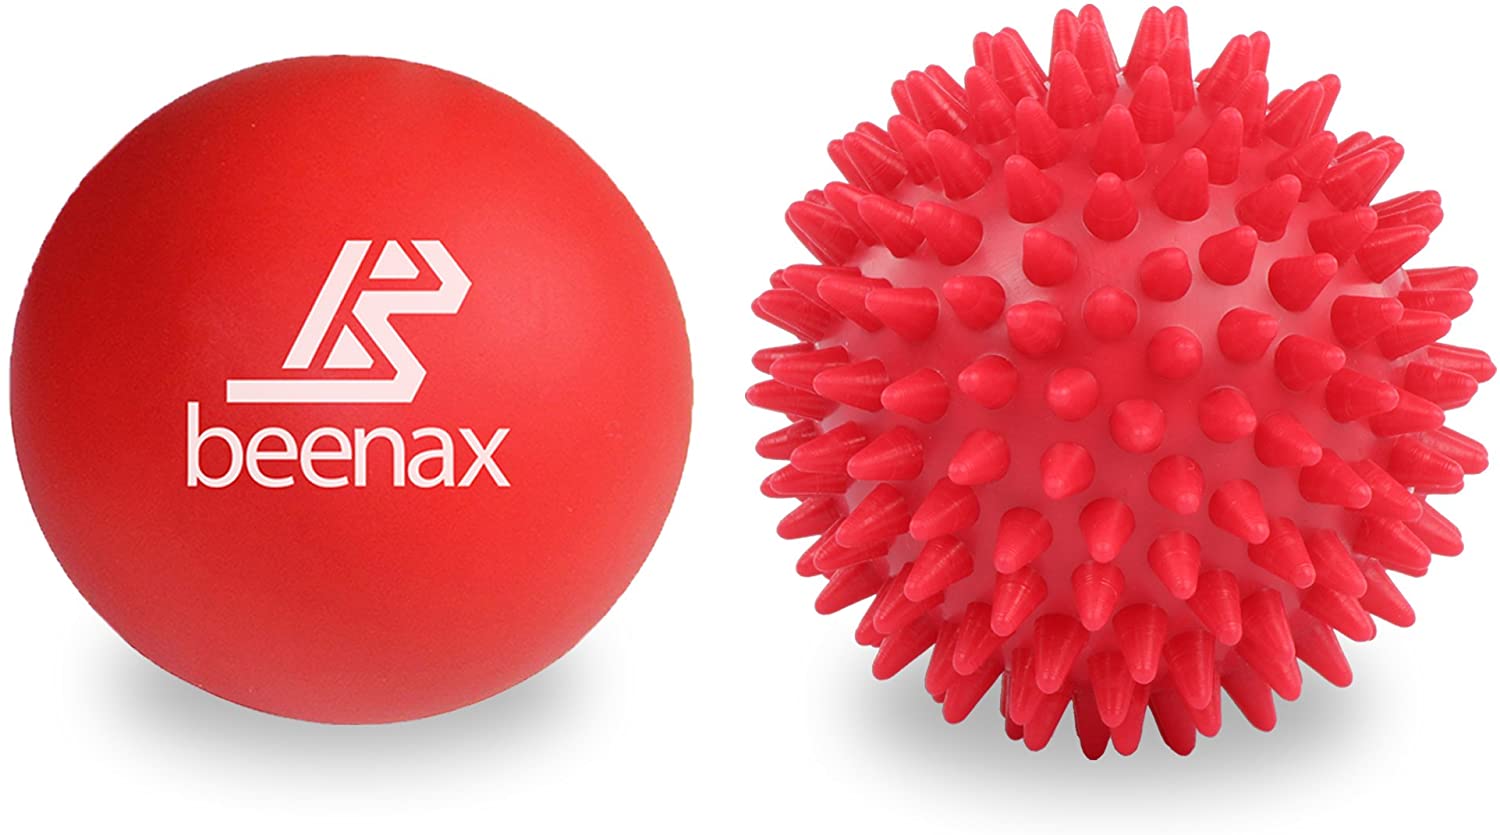 Beenax Lacrosse And Spiky Massage Ball Set Perfect For Trigger Point Therapy Myofascial Release